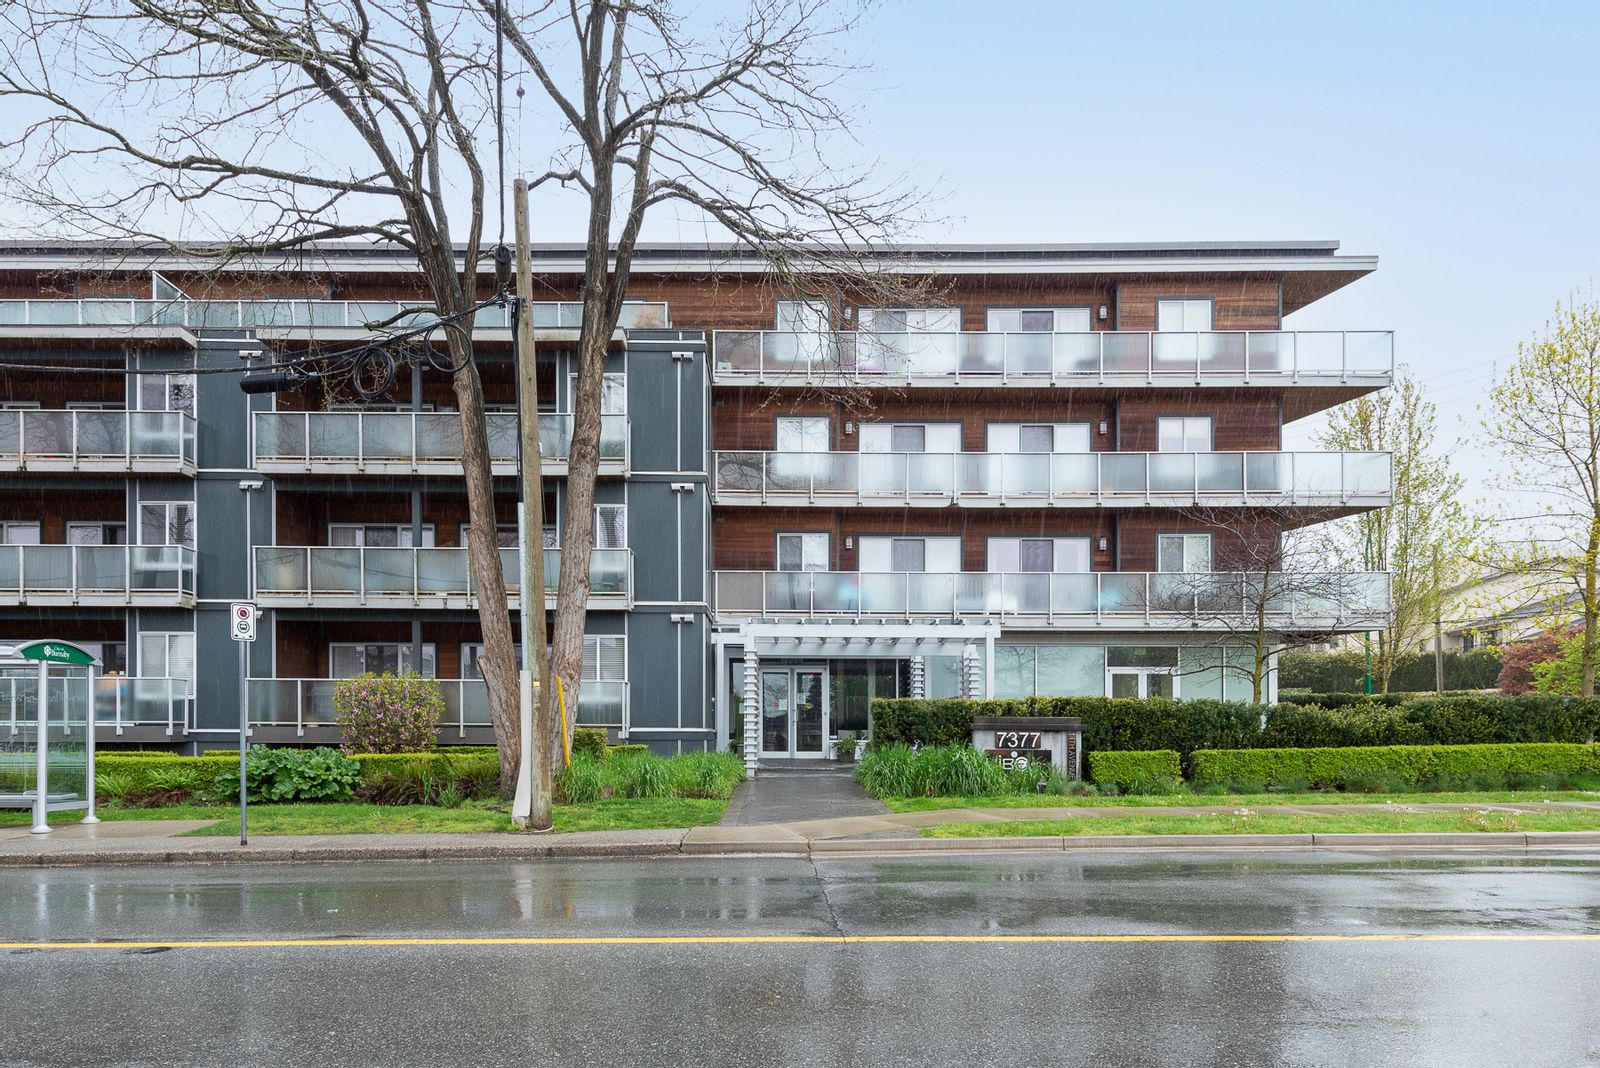 NEW PRICE - 209 7377 14th Ave - Burnaby, Burnaby East, Edmonds